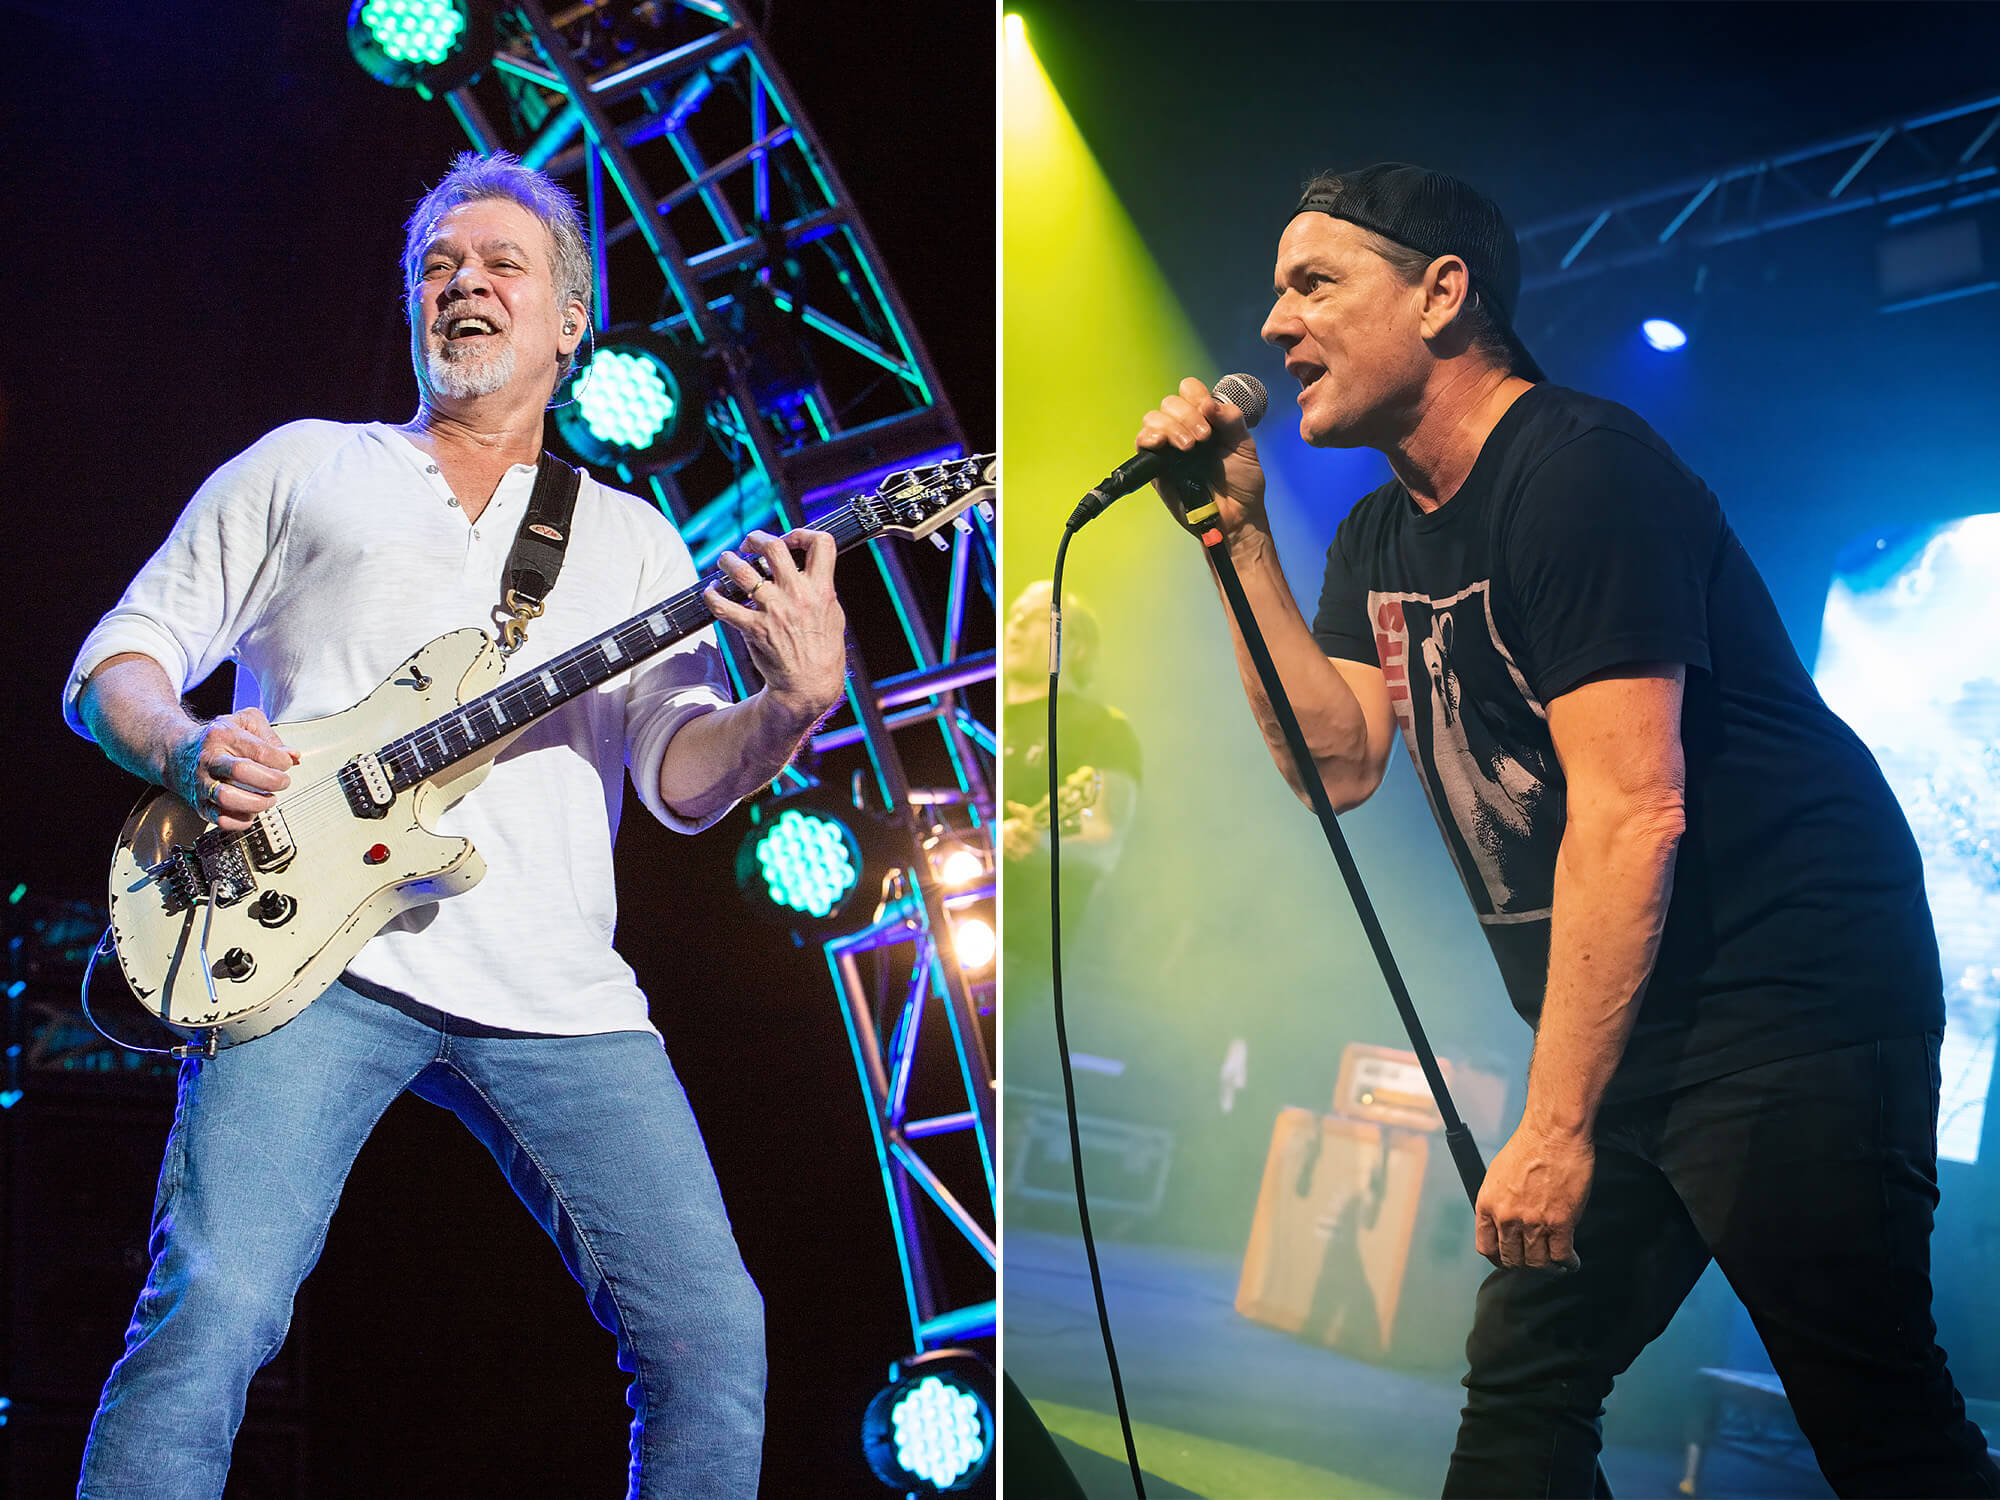 Eddie Van Halen (left) playing guitar and smiling. Whitfield Crane (right) singing into a mic. He is holding the mic stand as he sings, and is wearing a backwards cap.